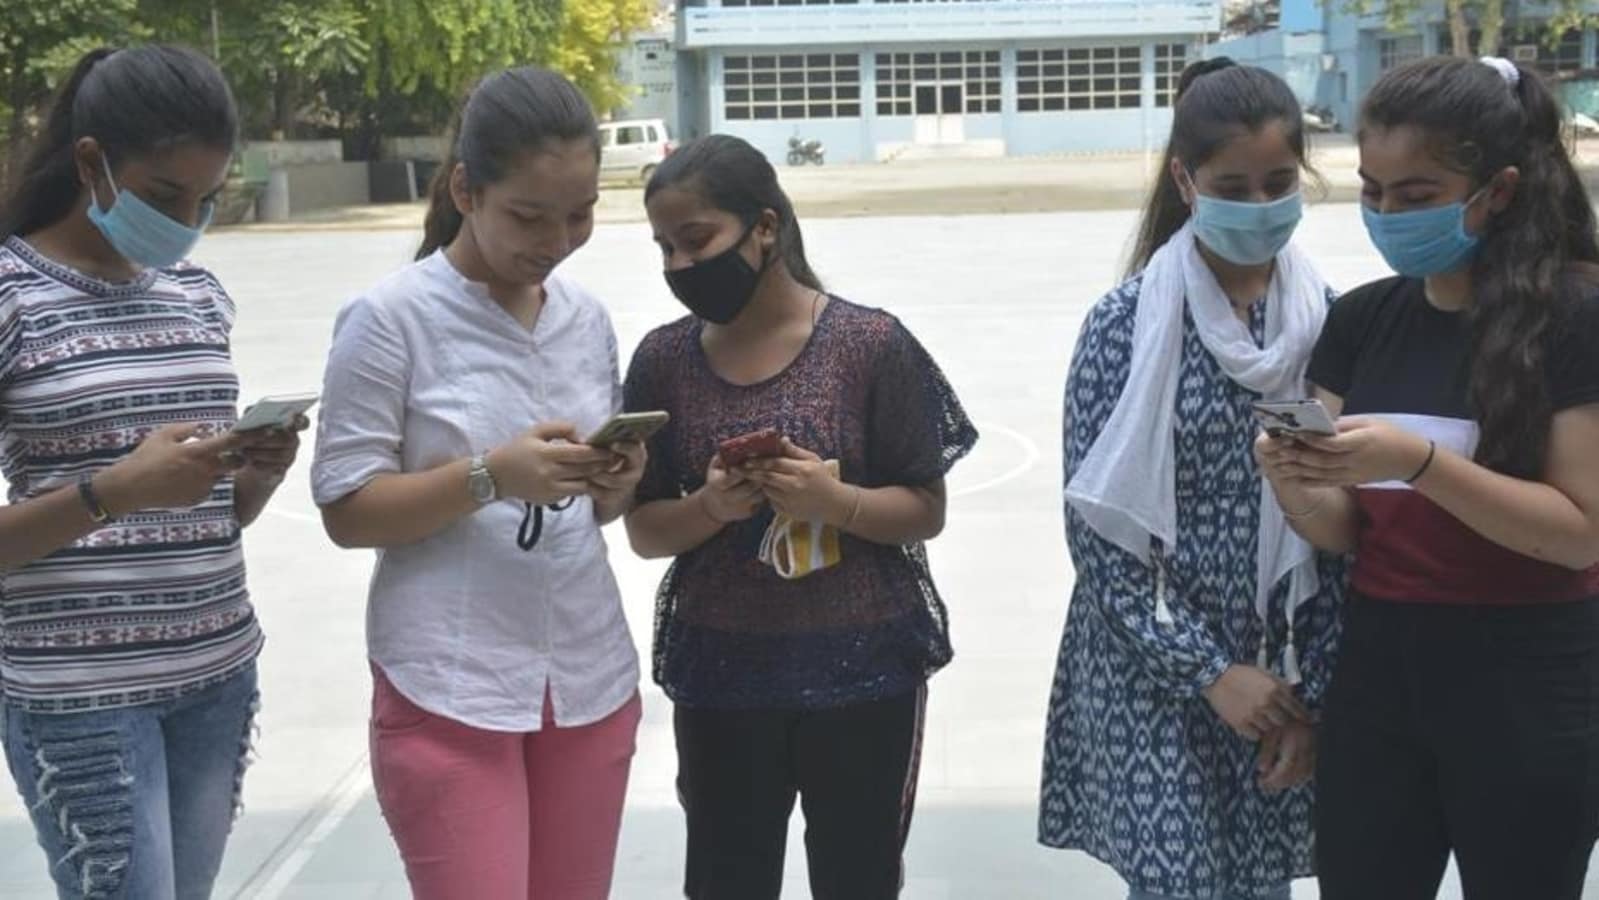 WB Madhyamik Result 2022 Date, Time: West Bengal 10th result on June 3 at 9 am